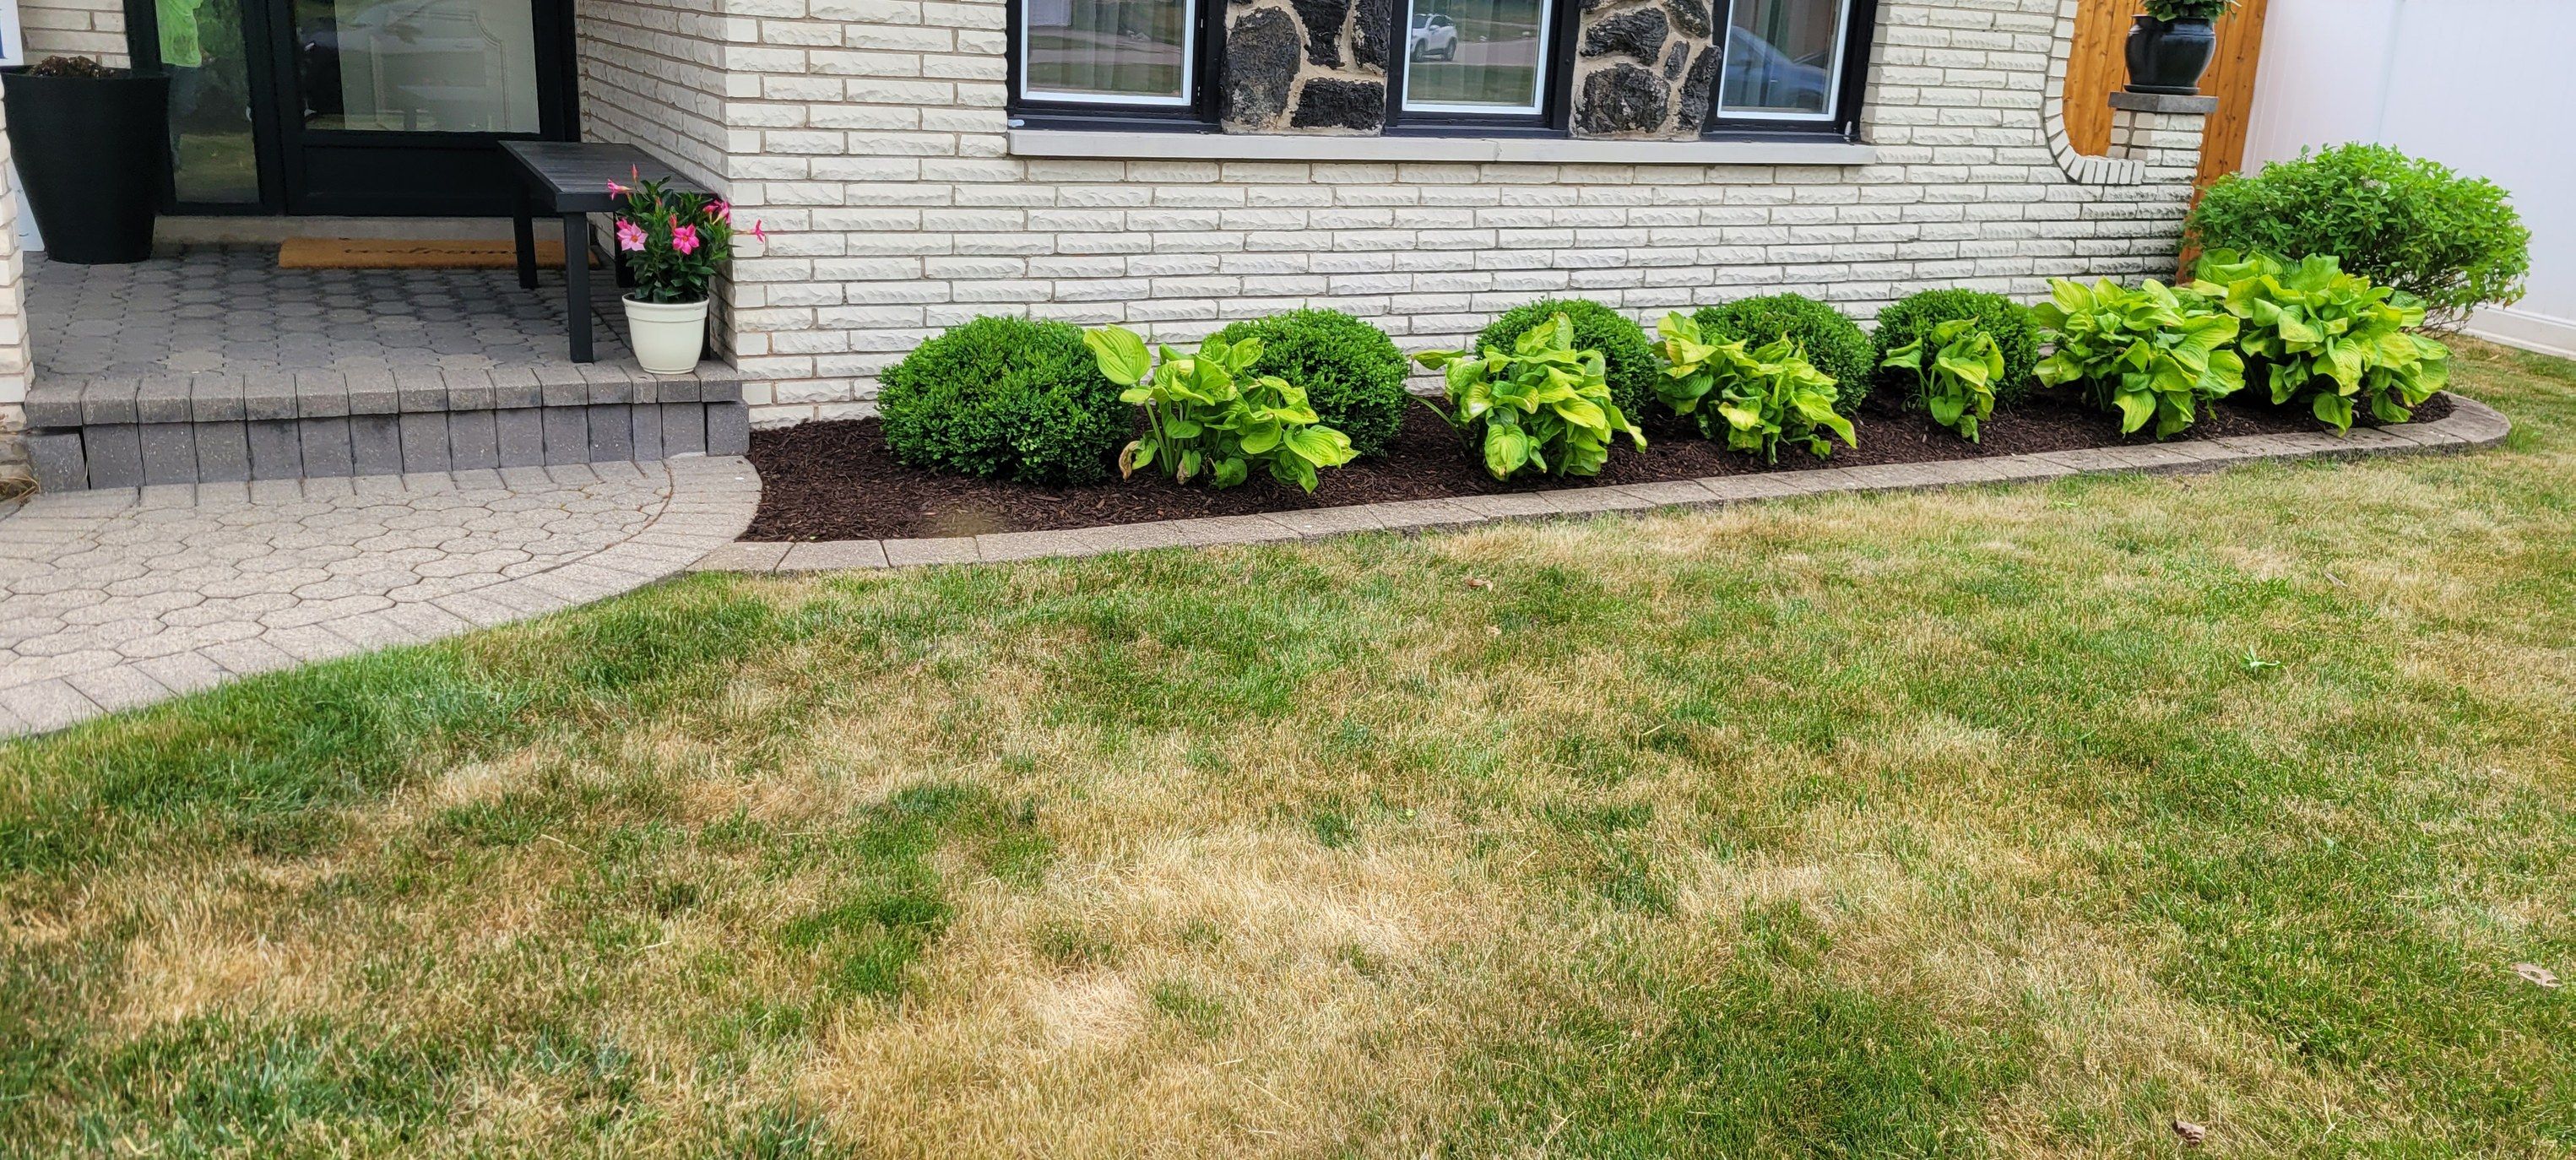 All Photos for Sals Lawn and Landscape in Oak Lawn, IL